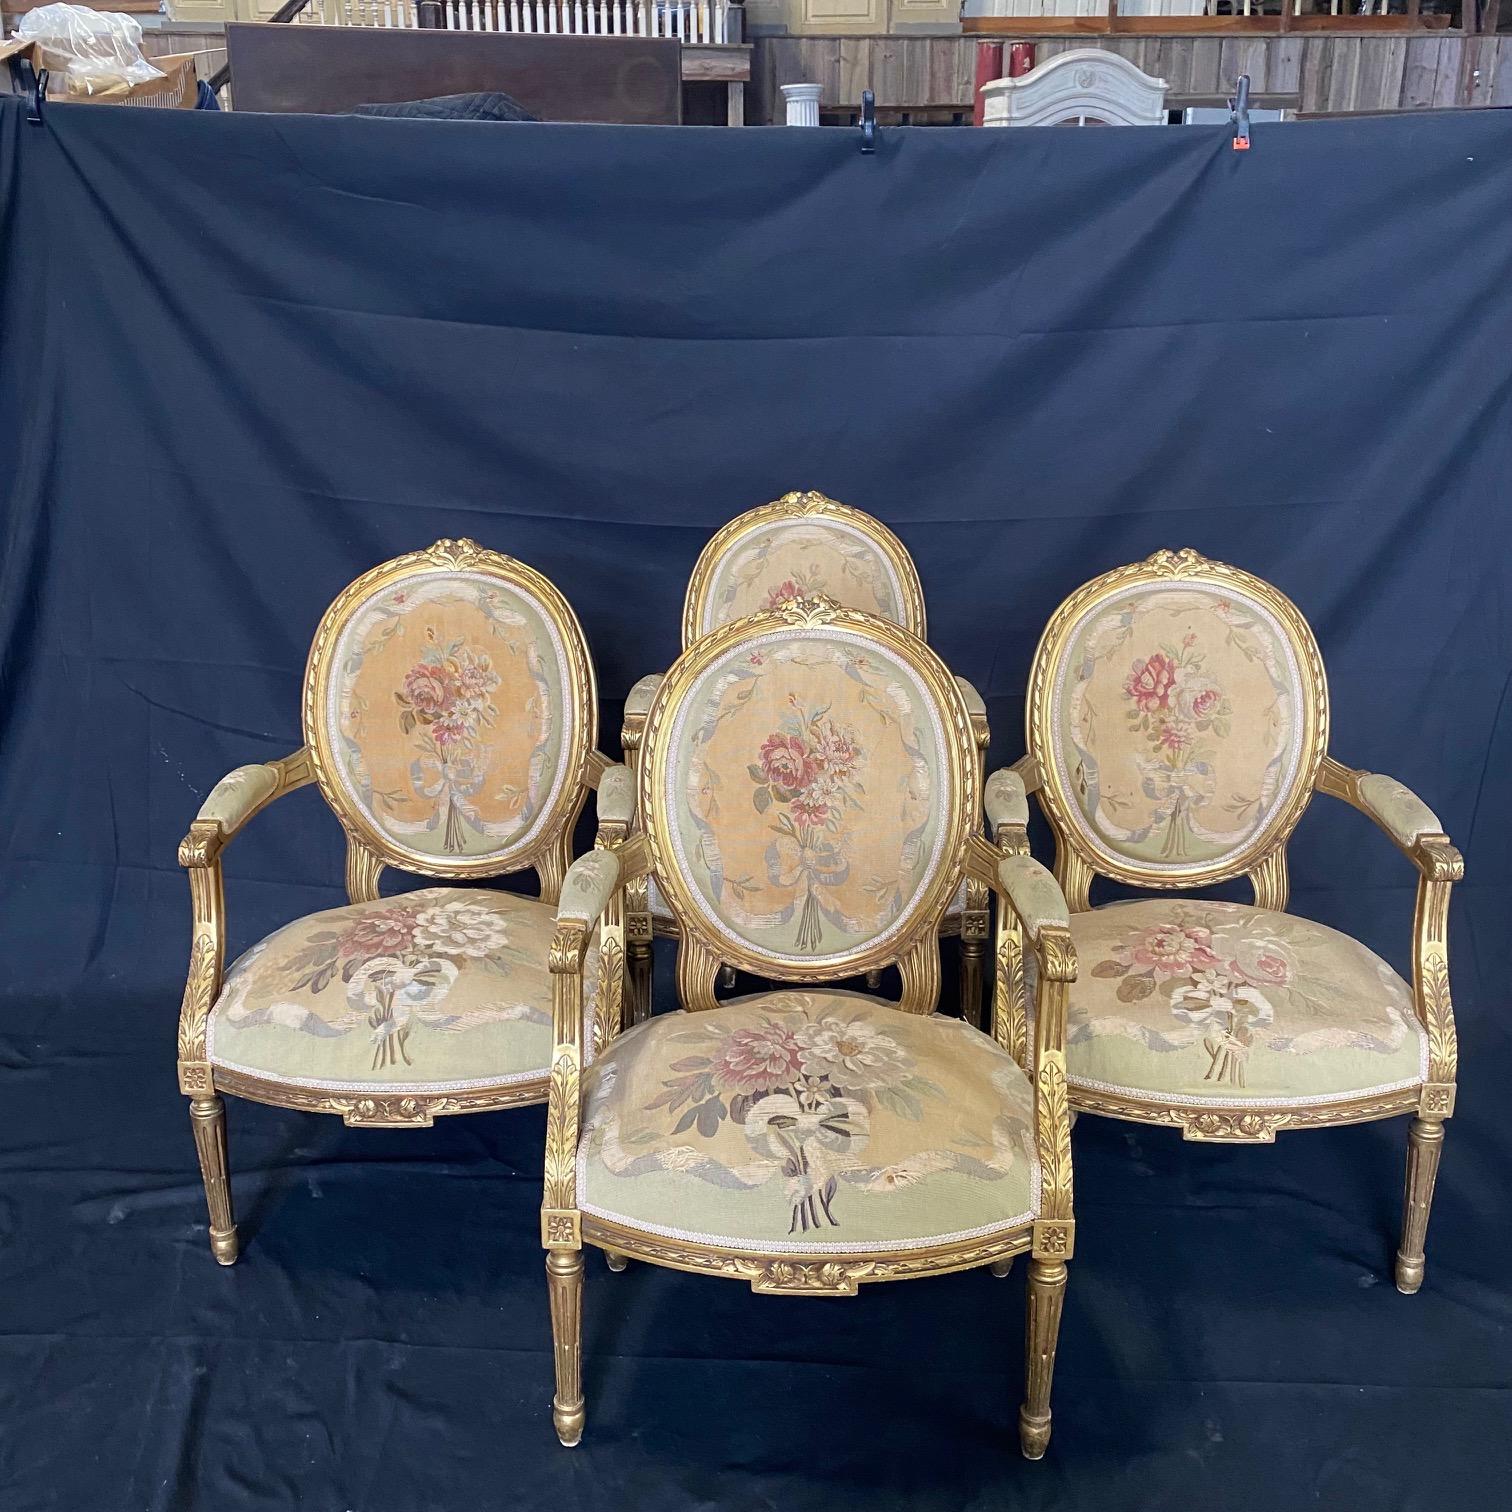 A magnificent 19th century French Louis XVI five piece carved walnut parlor suite richly upholstered in exceptional and rare handwoven Aubusson tapestries. The set includes four armchairs and a sofa or canapé, each finely carved with giltwood